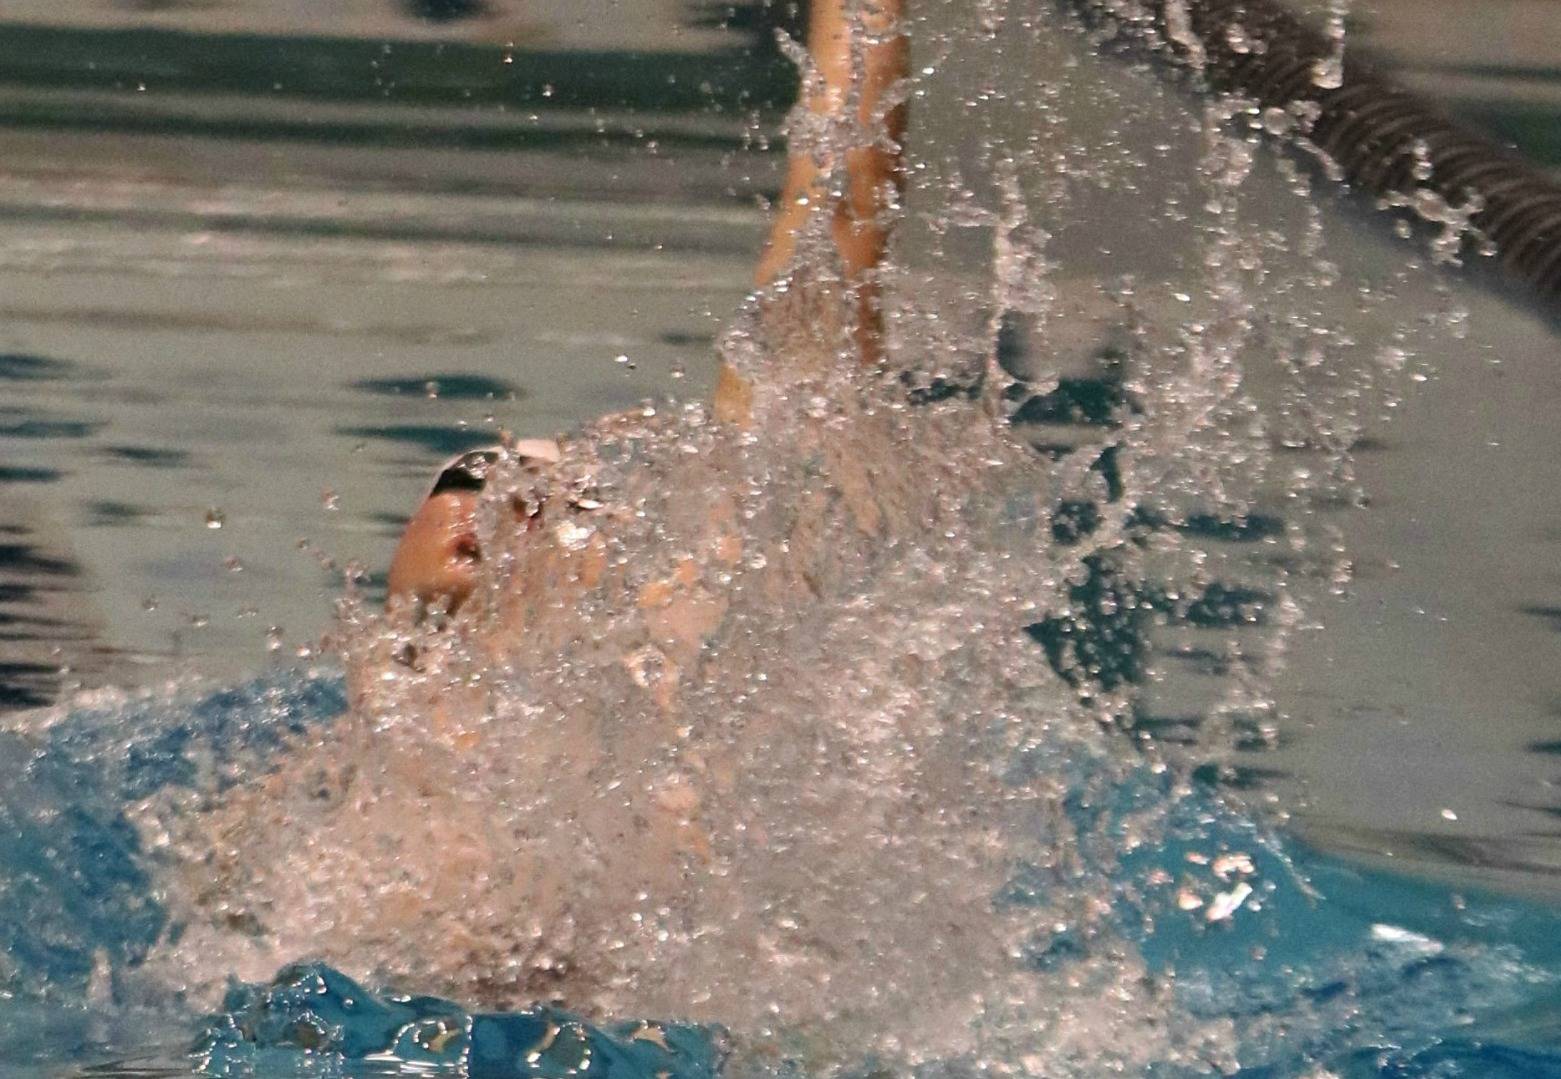 Richardson earns top honors at state swim meet